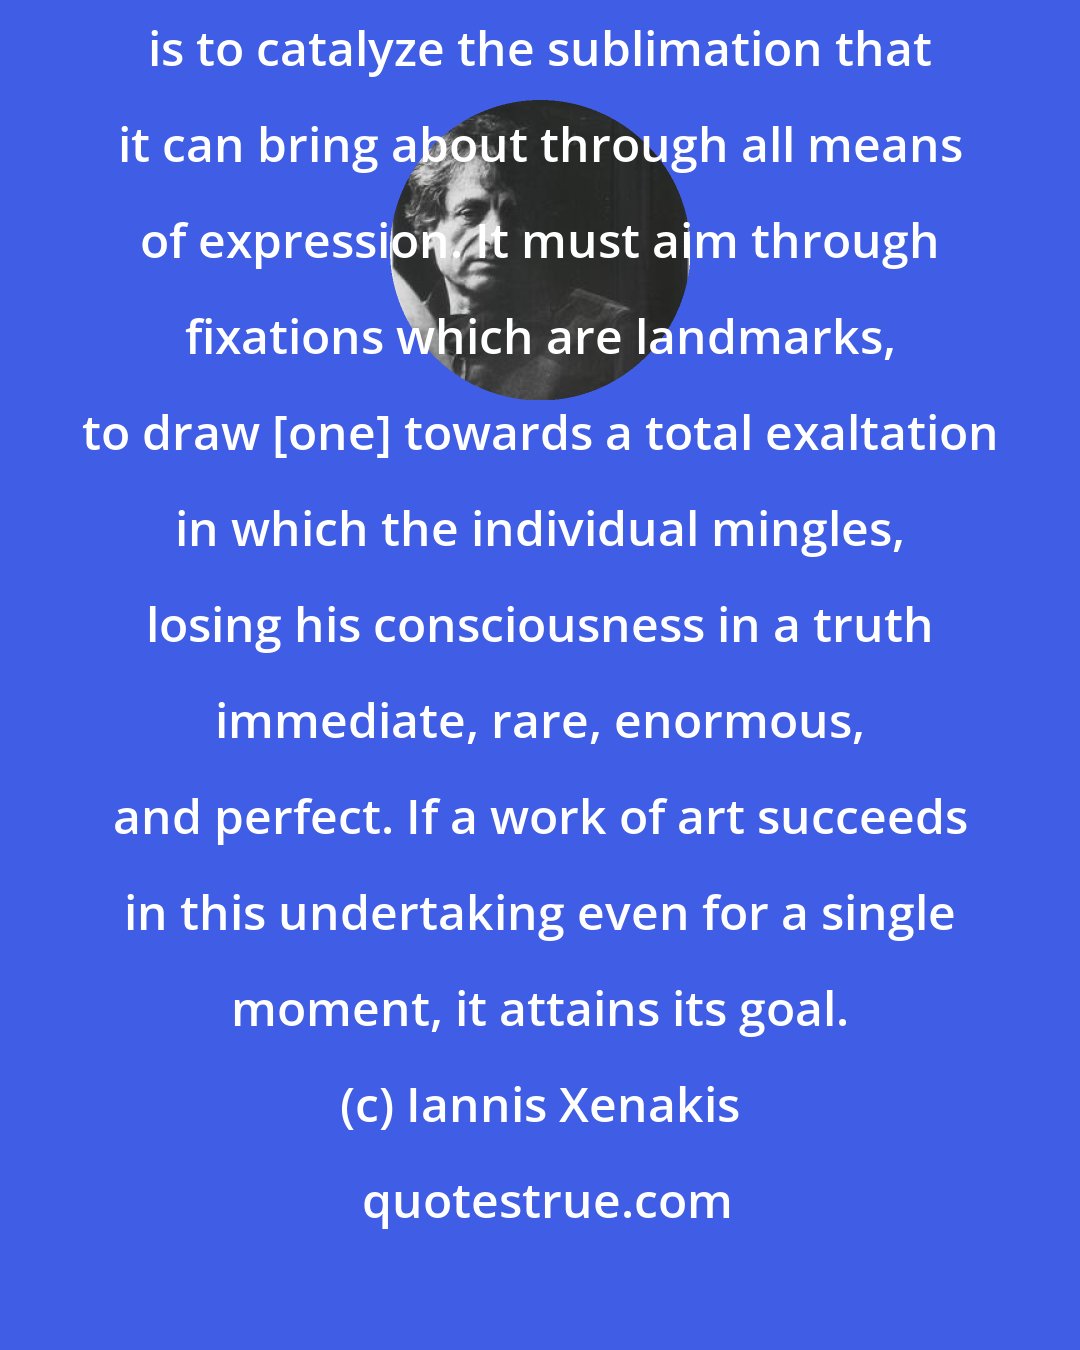 Iannis Xenakis: Art, and, above all, music, has a fundamental function, which is to catalyze the sublimation that it can bring about through all means of expression. It must aim through fixations which are landmarks, to draw [one] towards a total exaltation in which the individual mingles, losing his consciousness in a truth immediate, rare, enormous, and perfect. If a work of art succeeds in this undertaking even for a single moment, it attains its goal.